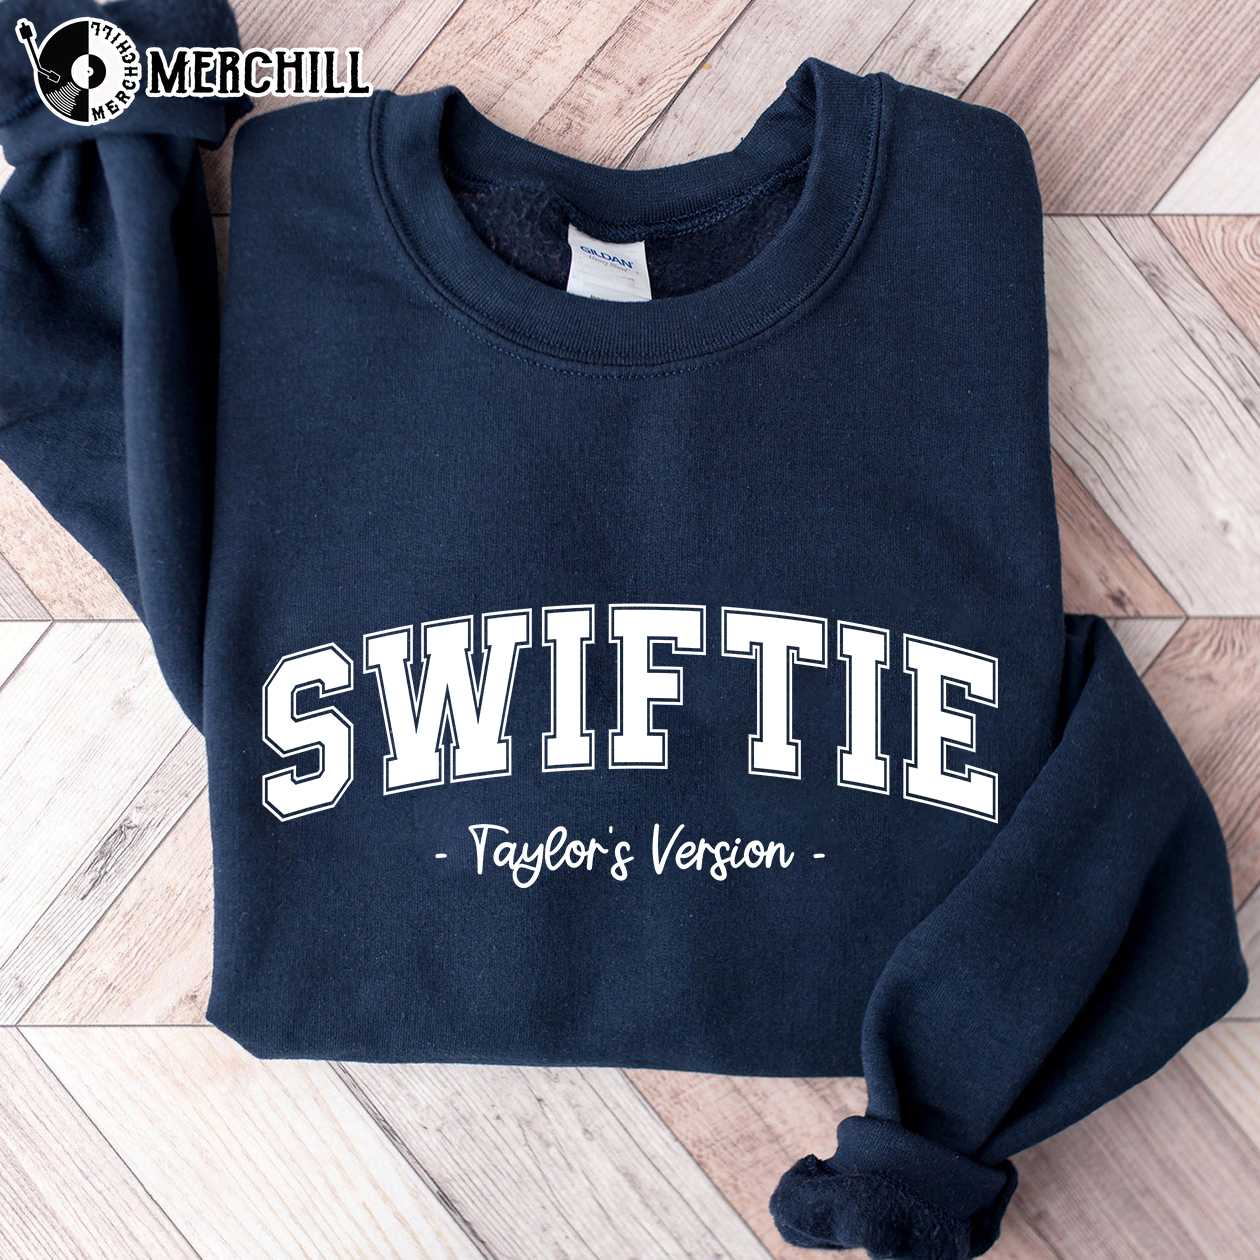 The Best Taylor Swift Gifts for Teens - Everything Your Swiftie Could Want